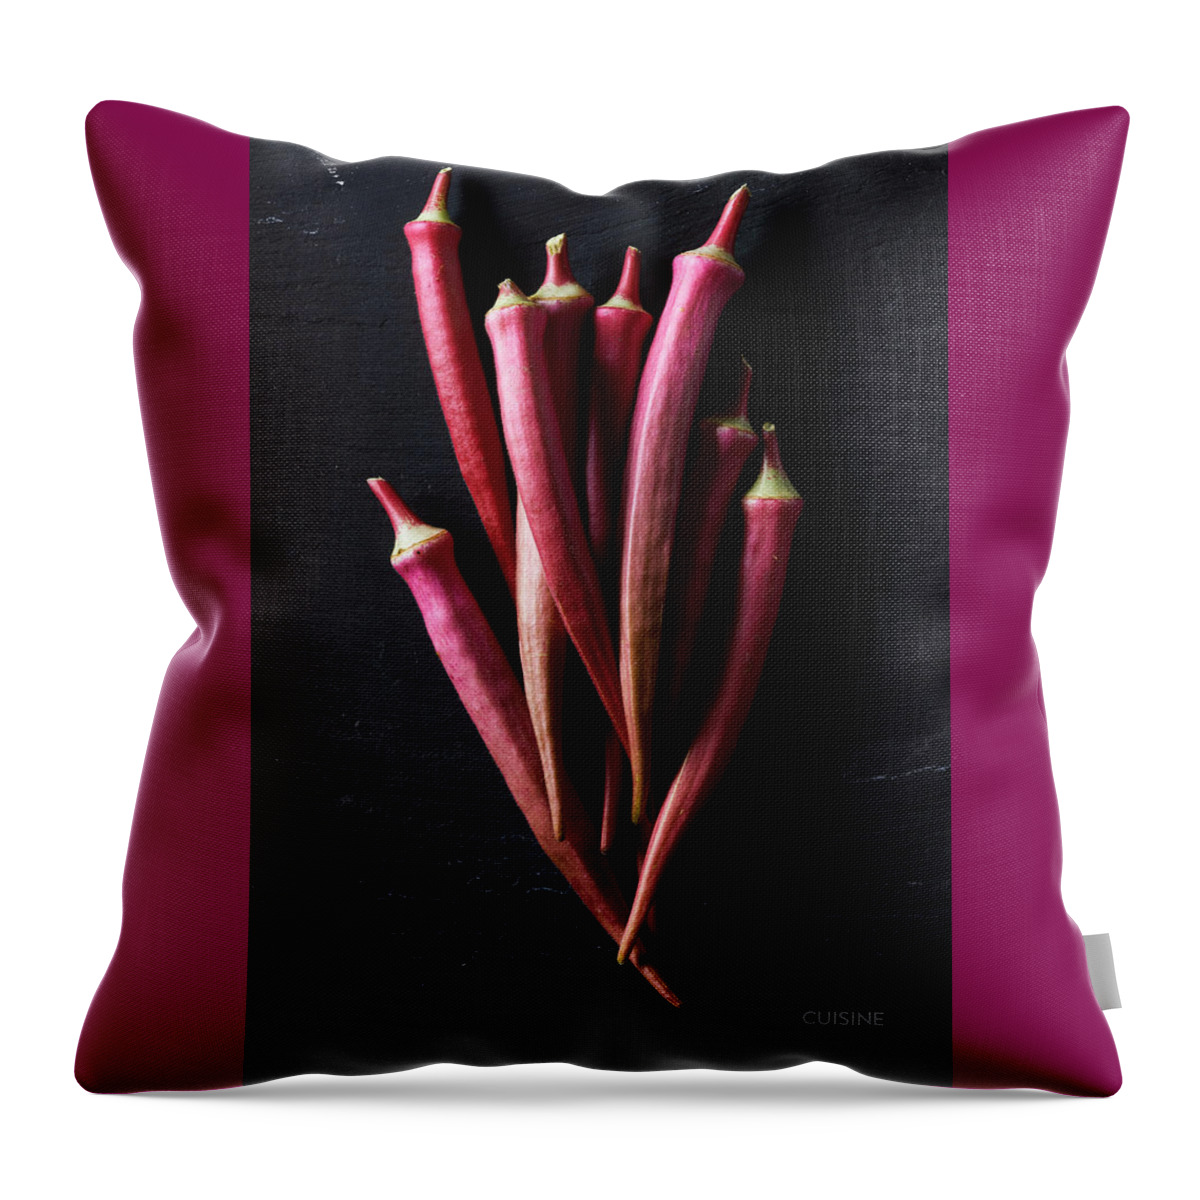 Red Okra Throw Pillow featuring the photograph Red okra by Cuisine at Home